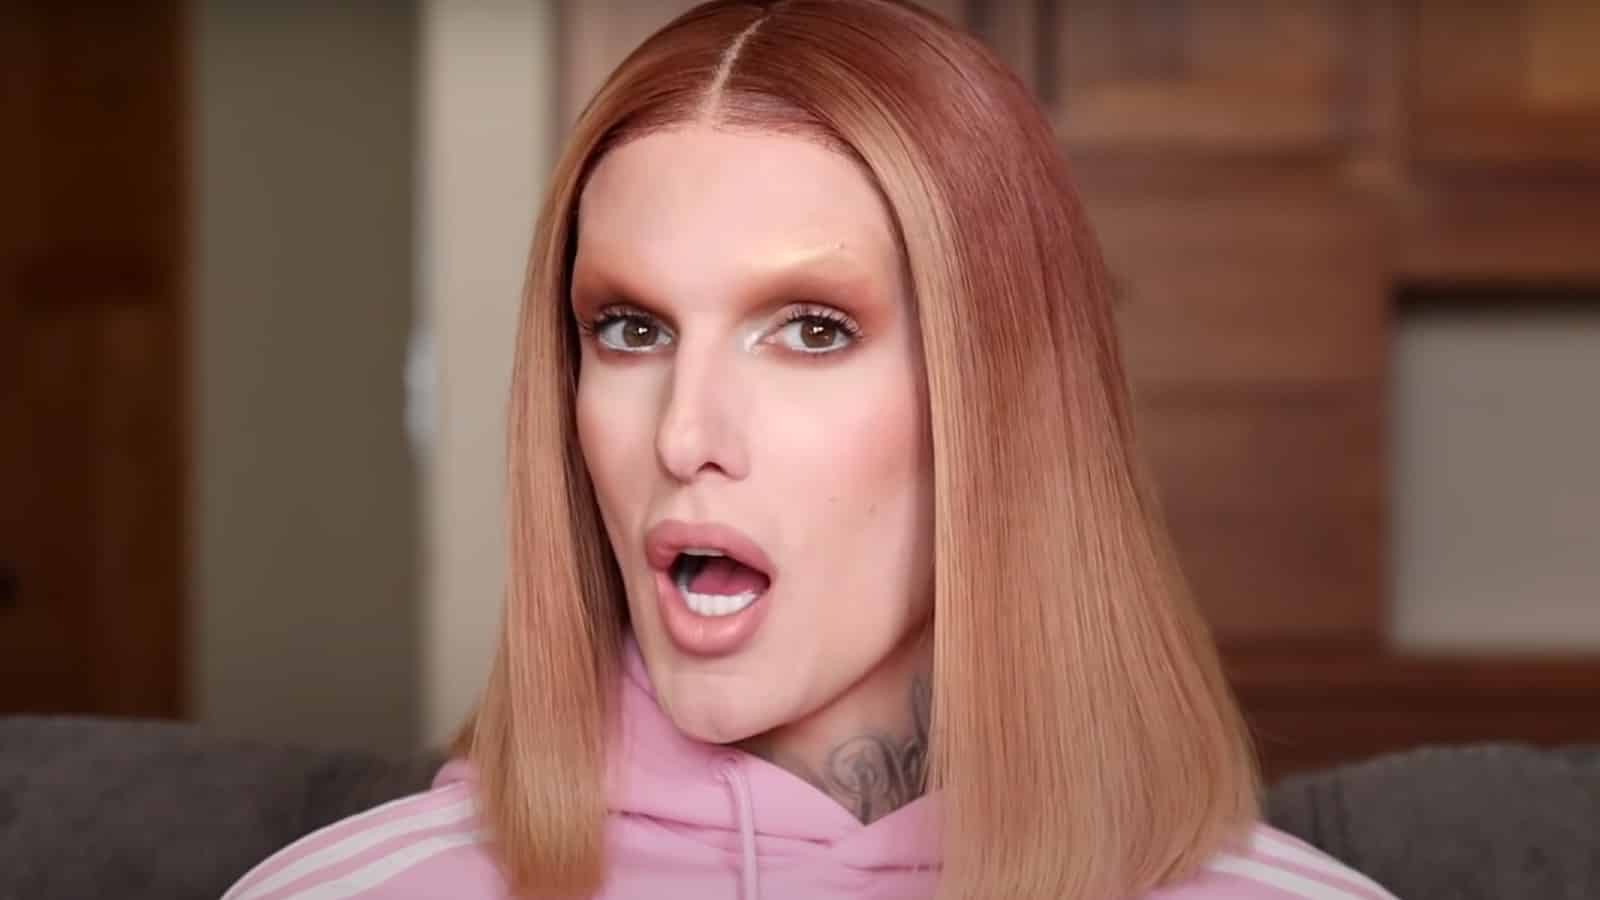 Jeffree Star in a YouTube video